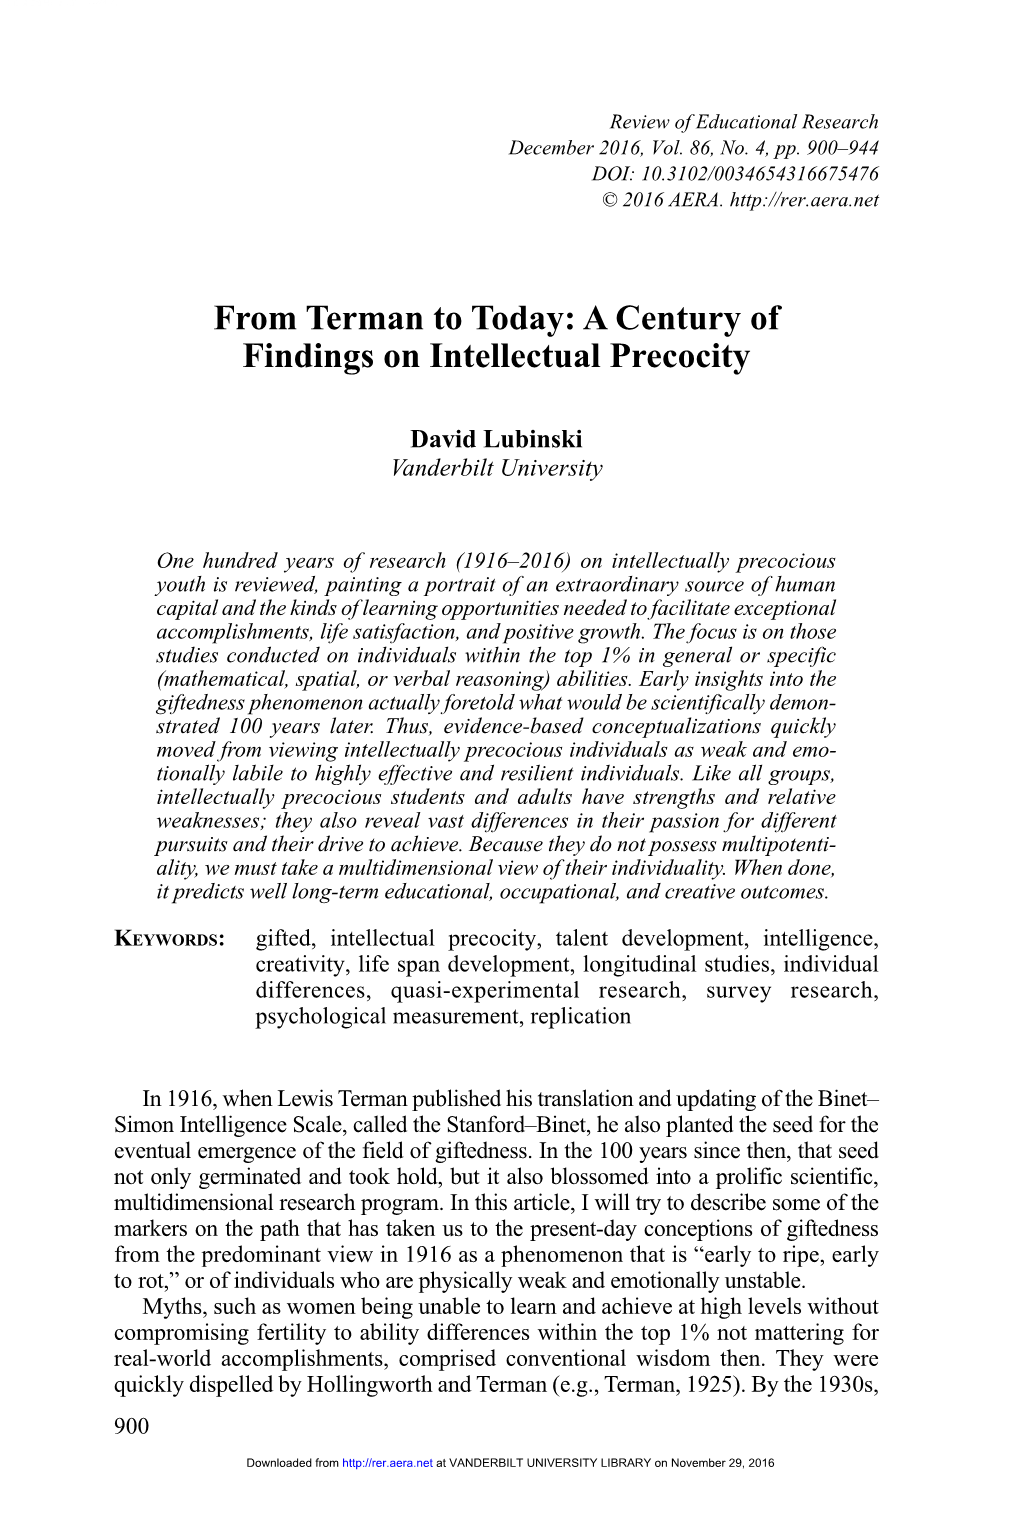 From Terman to Today: a Century of Findings on Intellectual Precocity